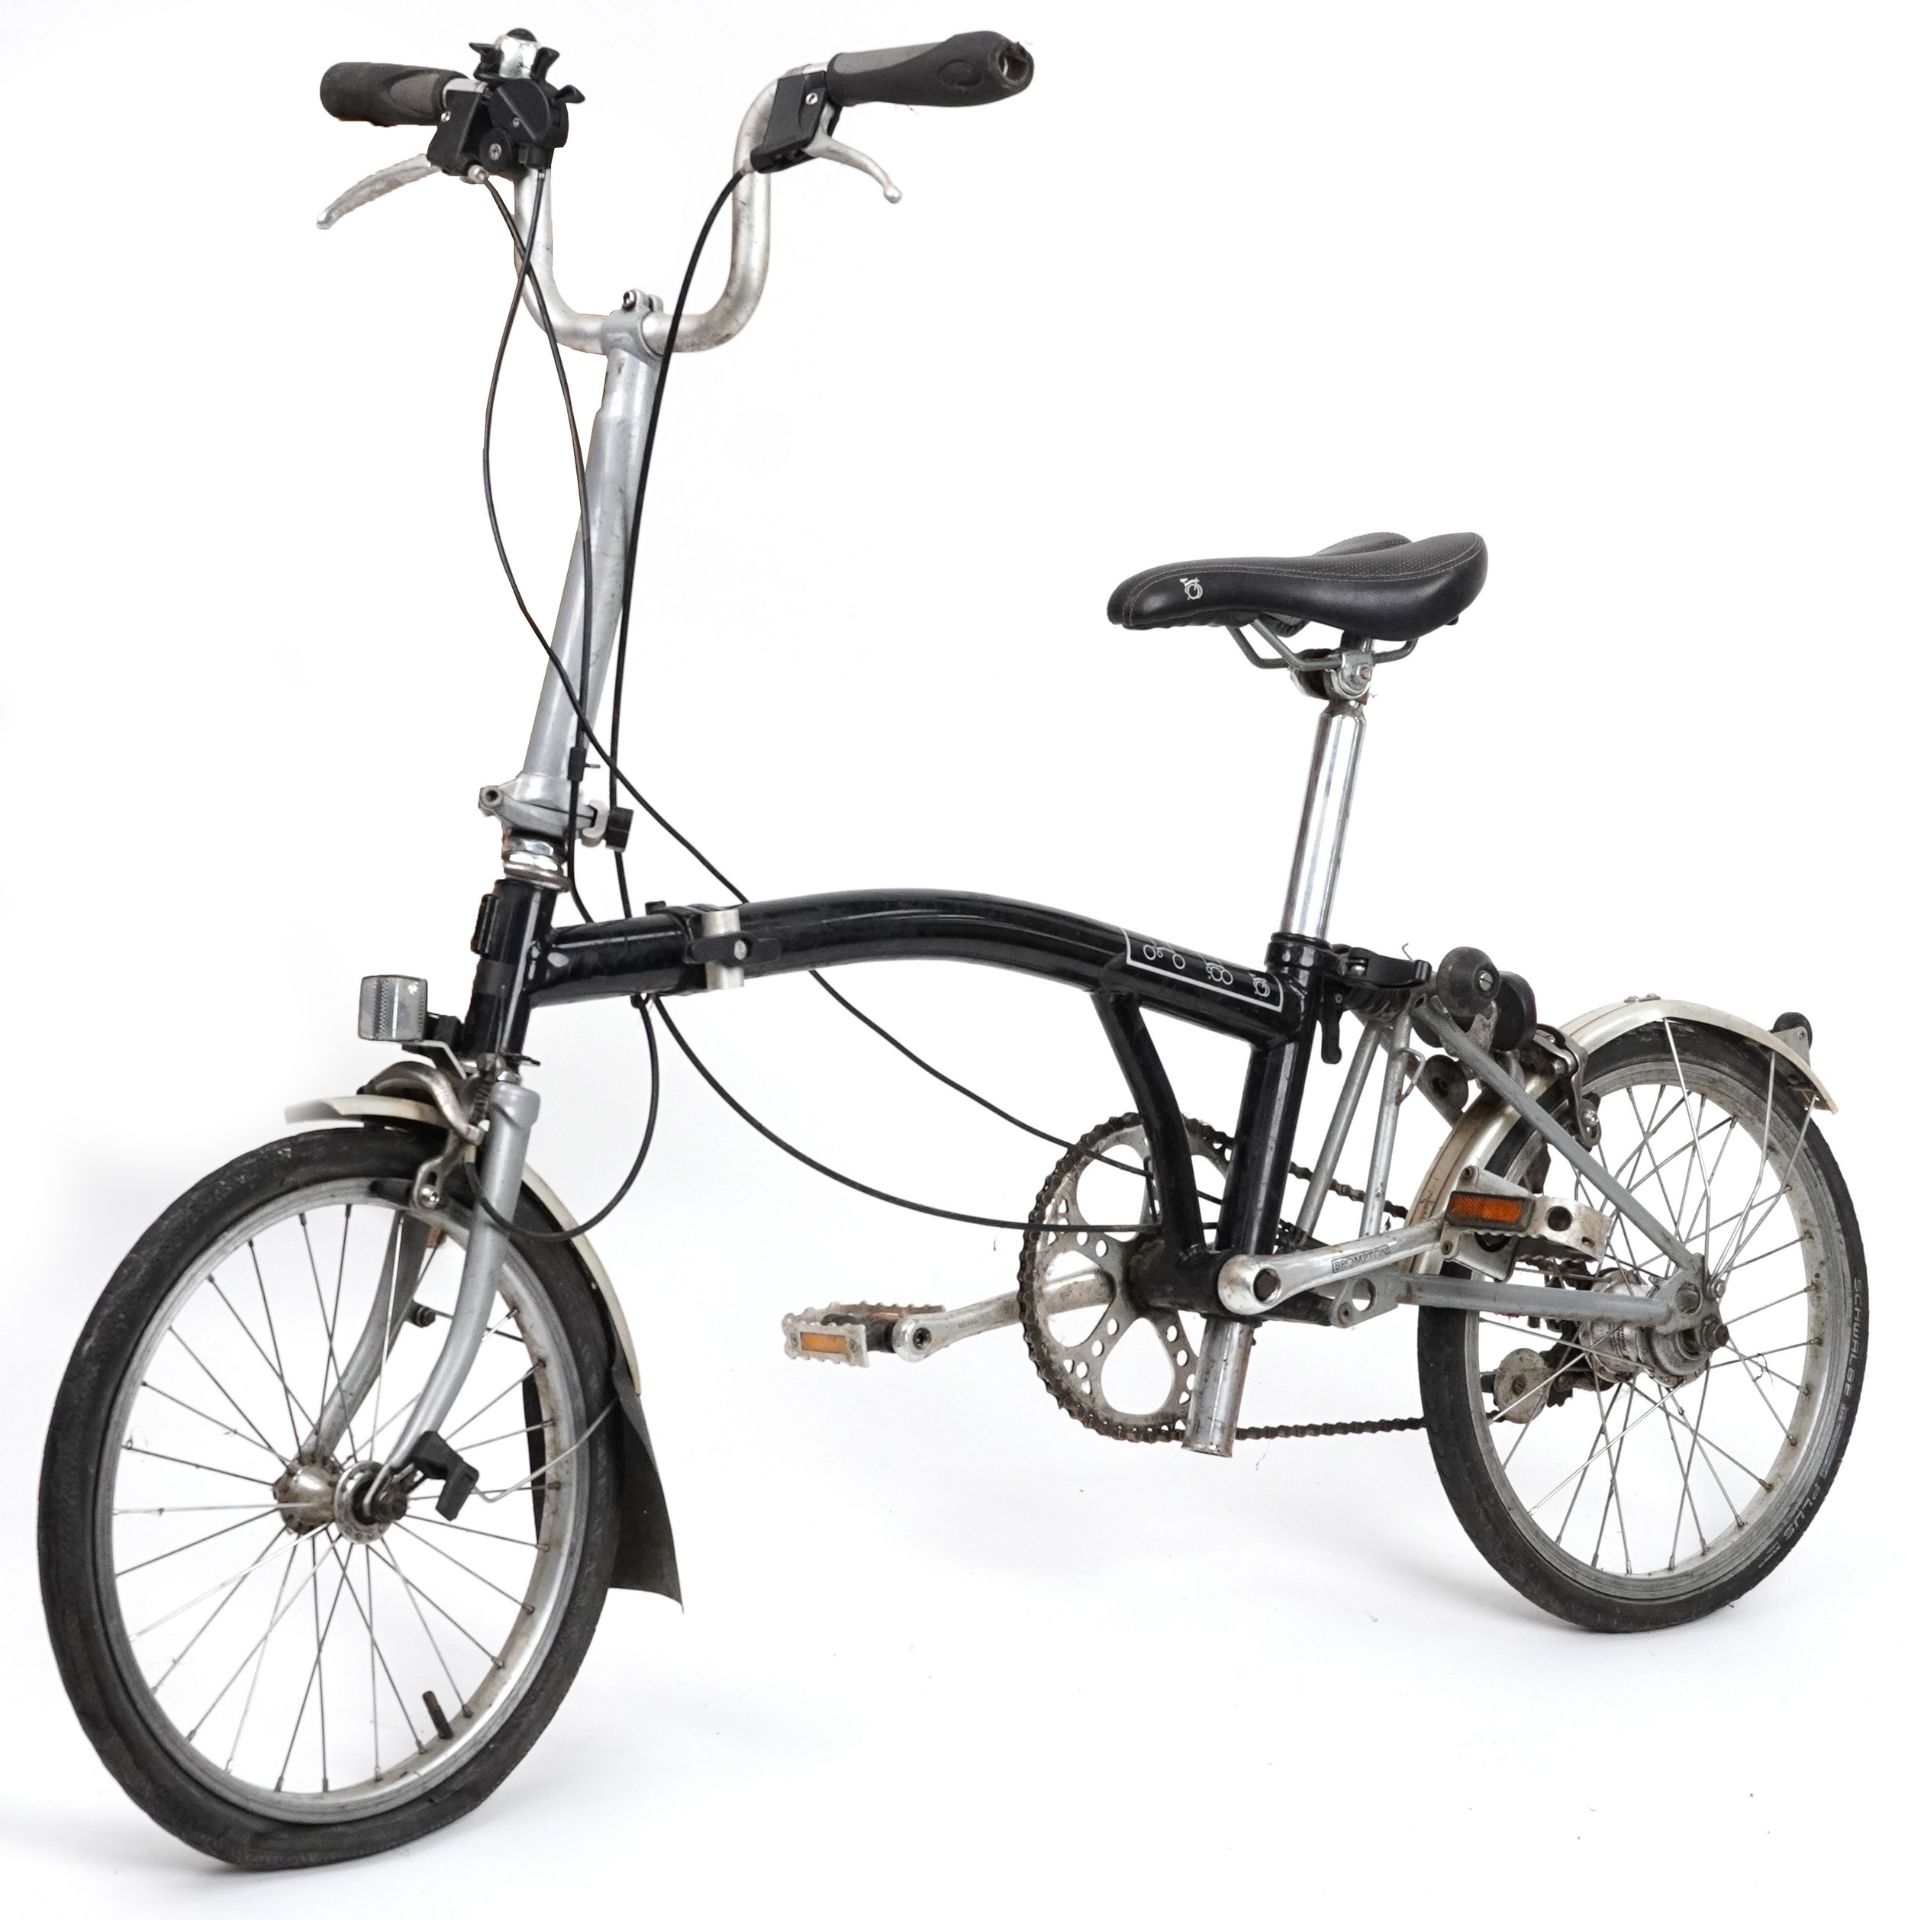 Folding Brompton bike, serial number 0805090669 : For further information on this lot please visit